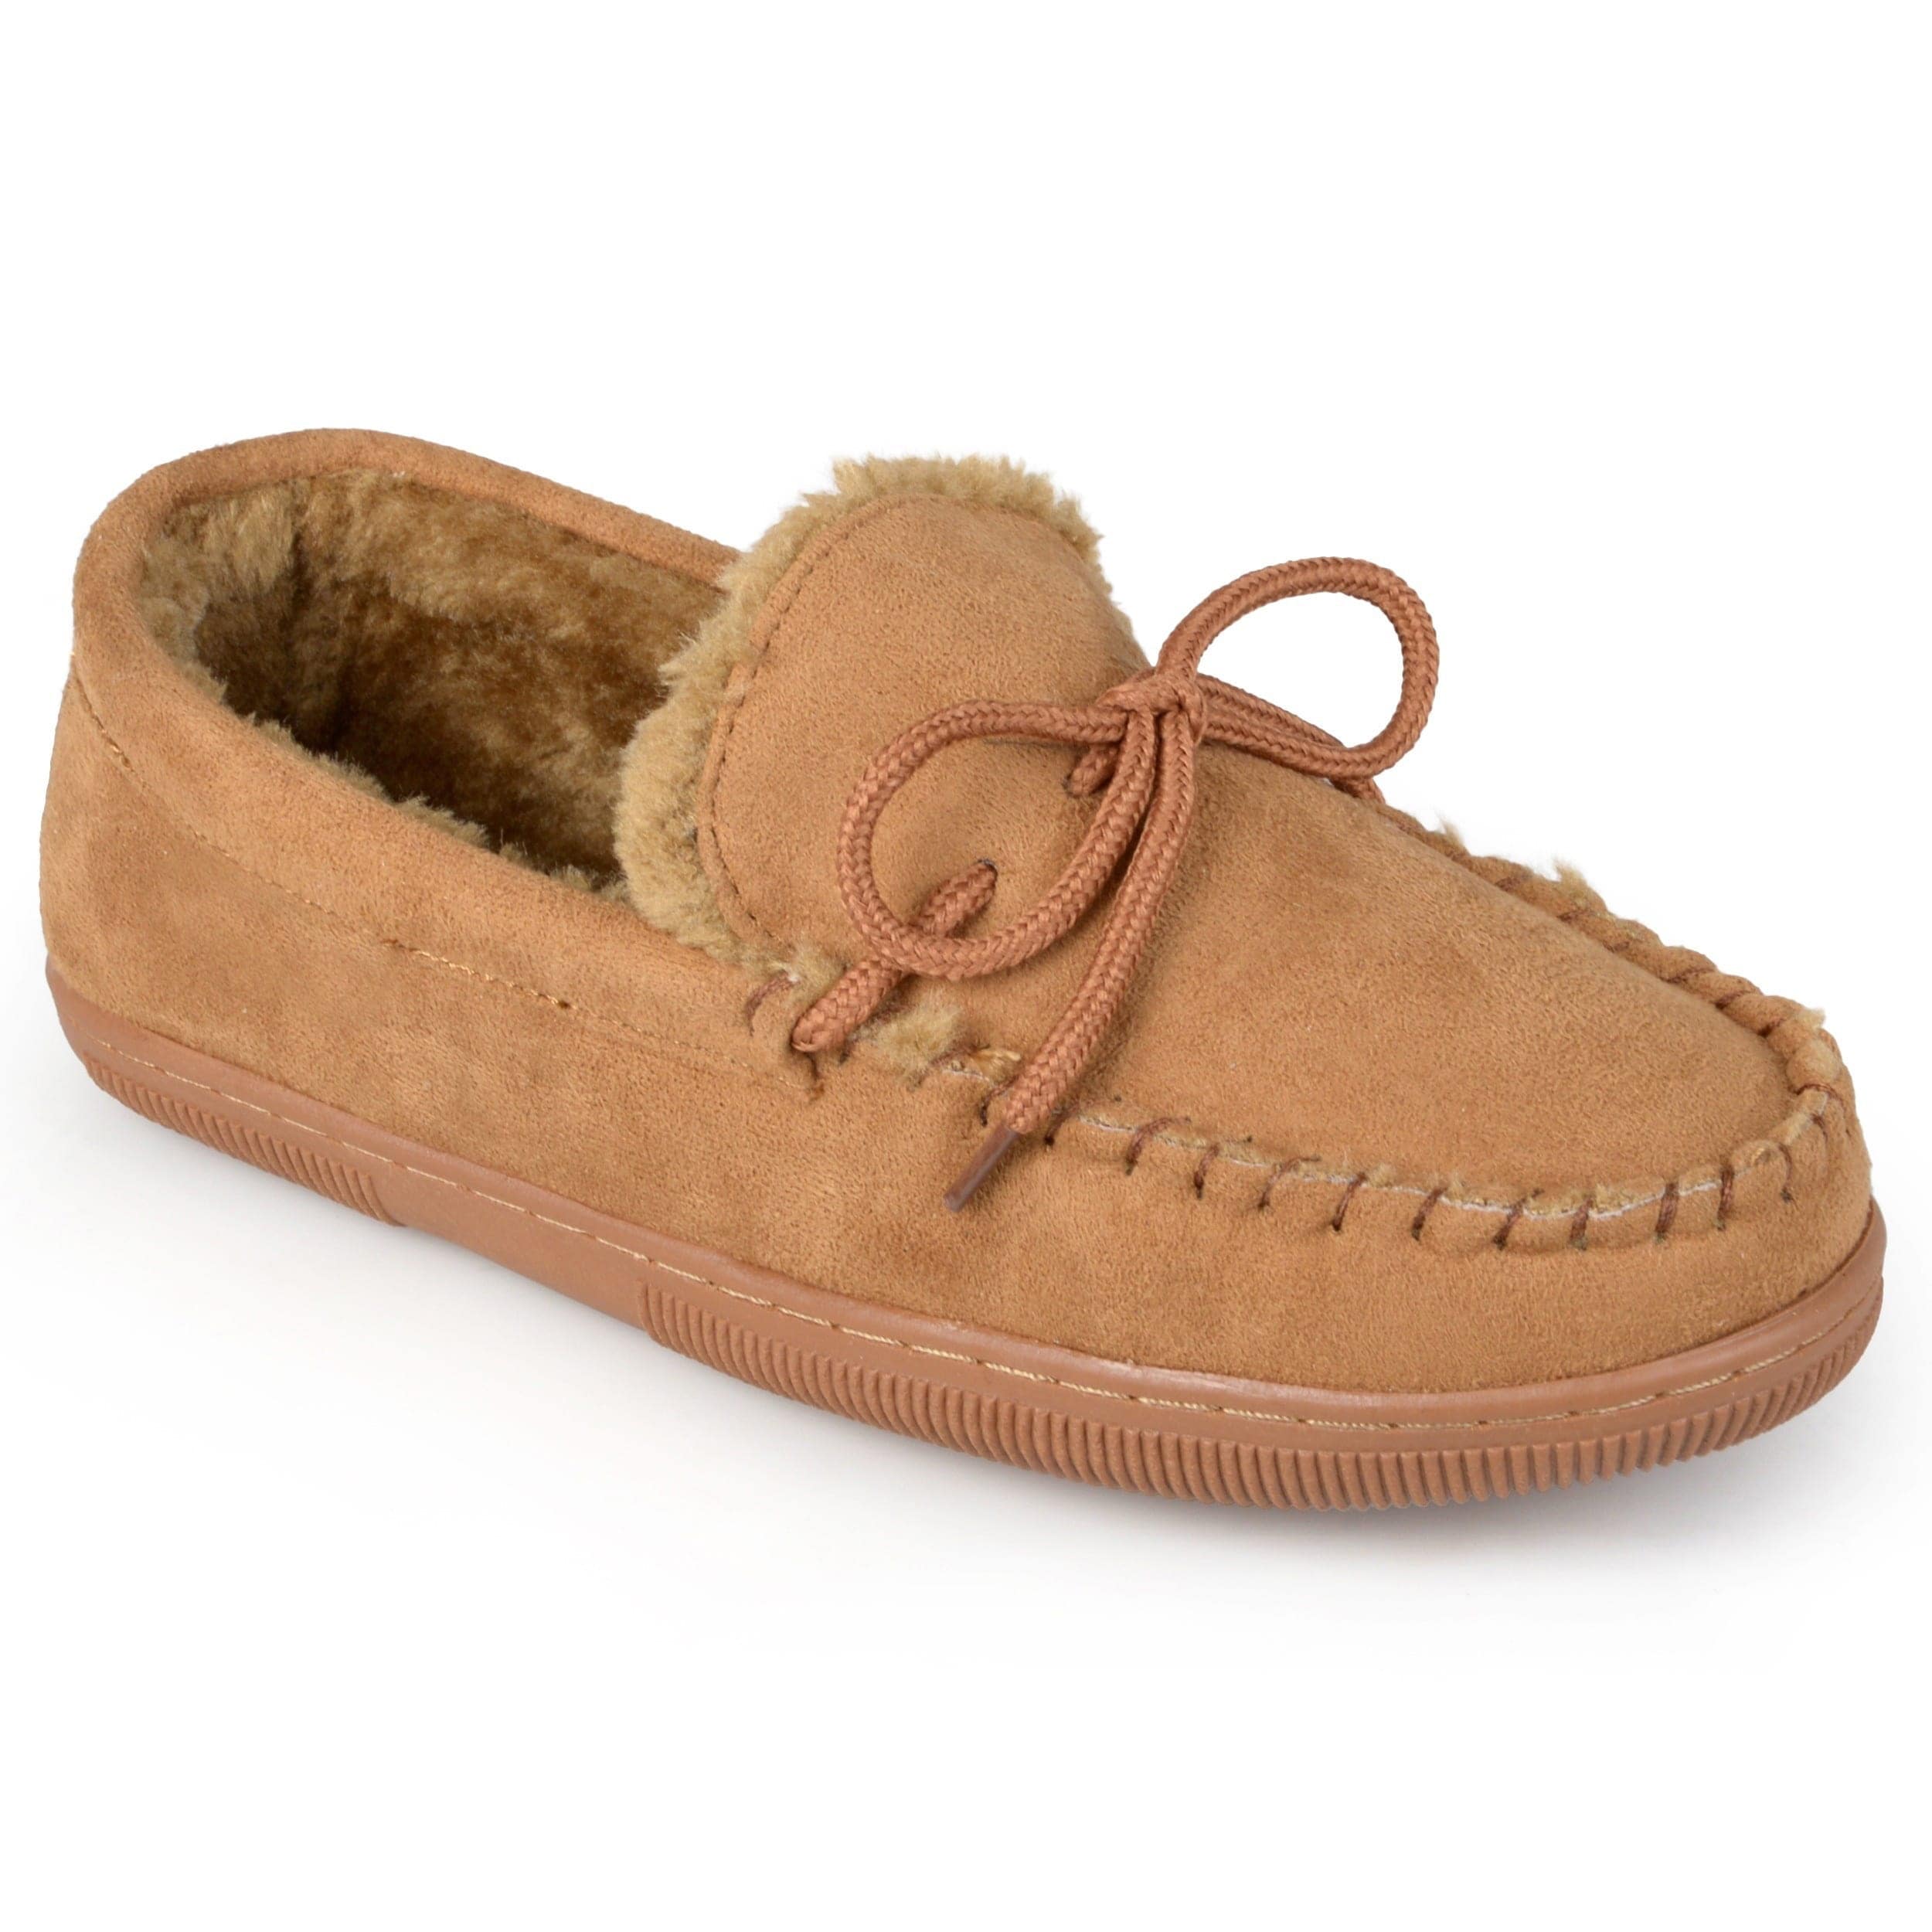 moccasins with fur on the outside